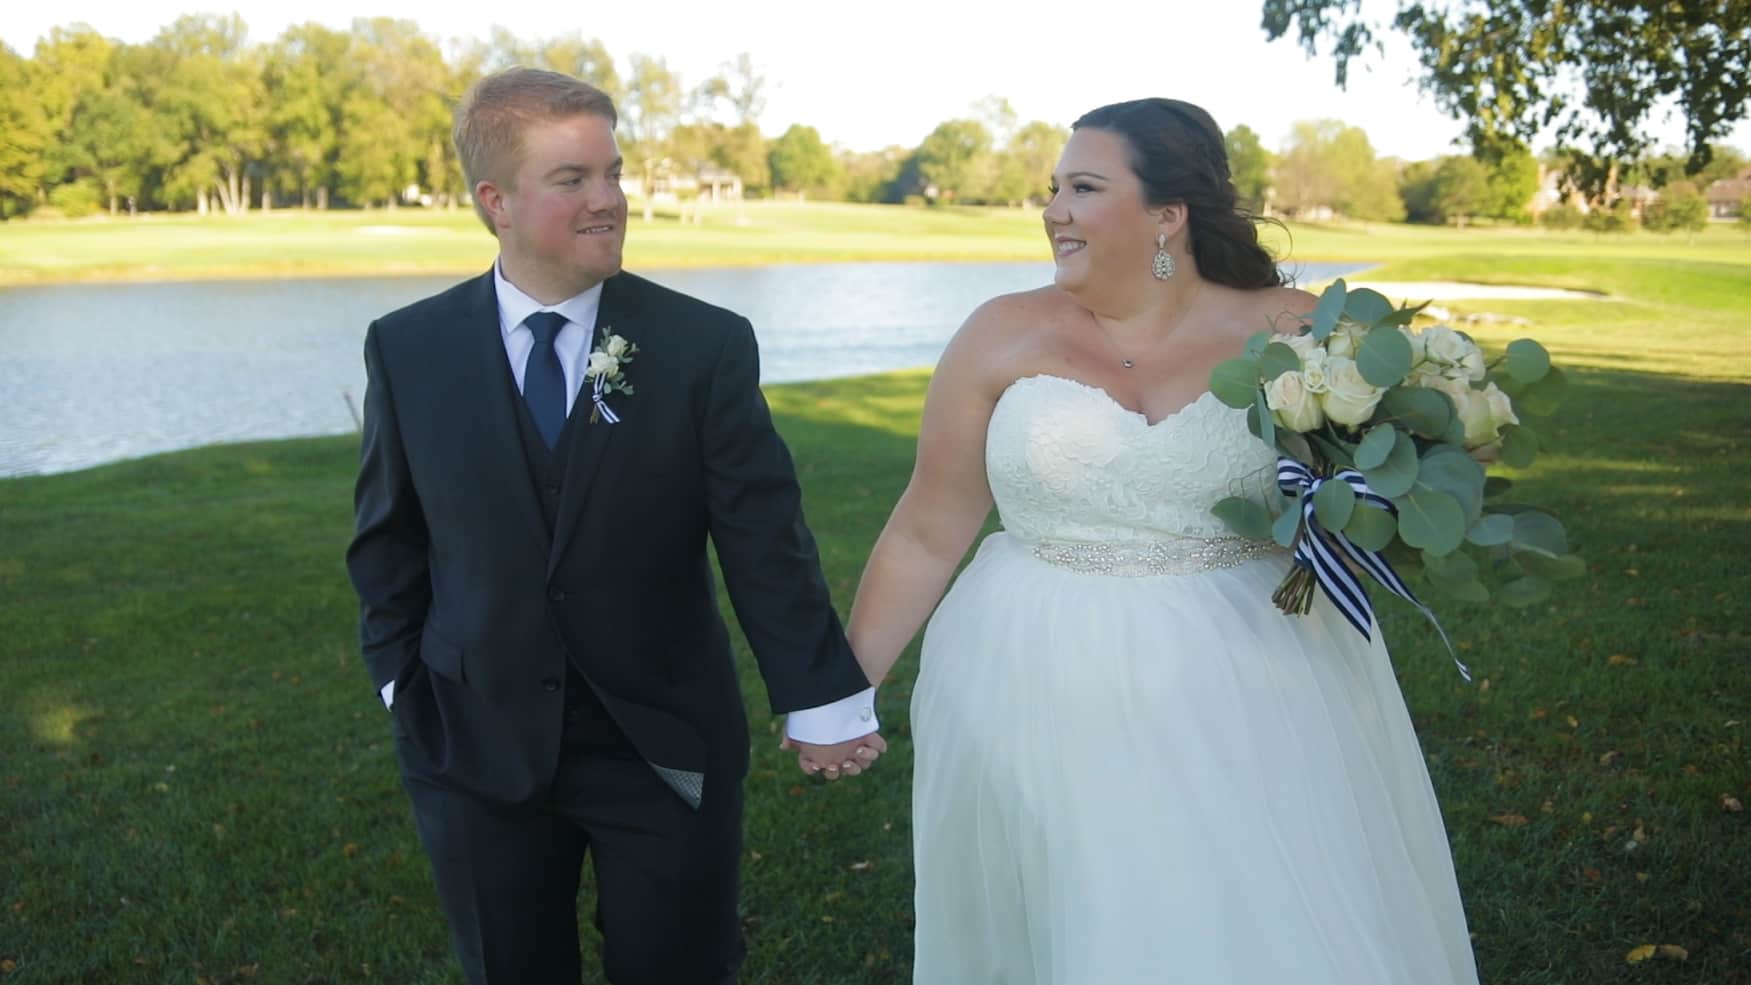 A Wedding at Champion’s Trace // Michael + Laura’s Wedding Video